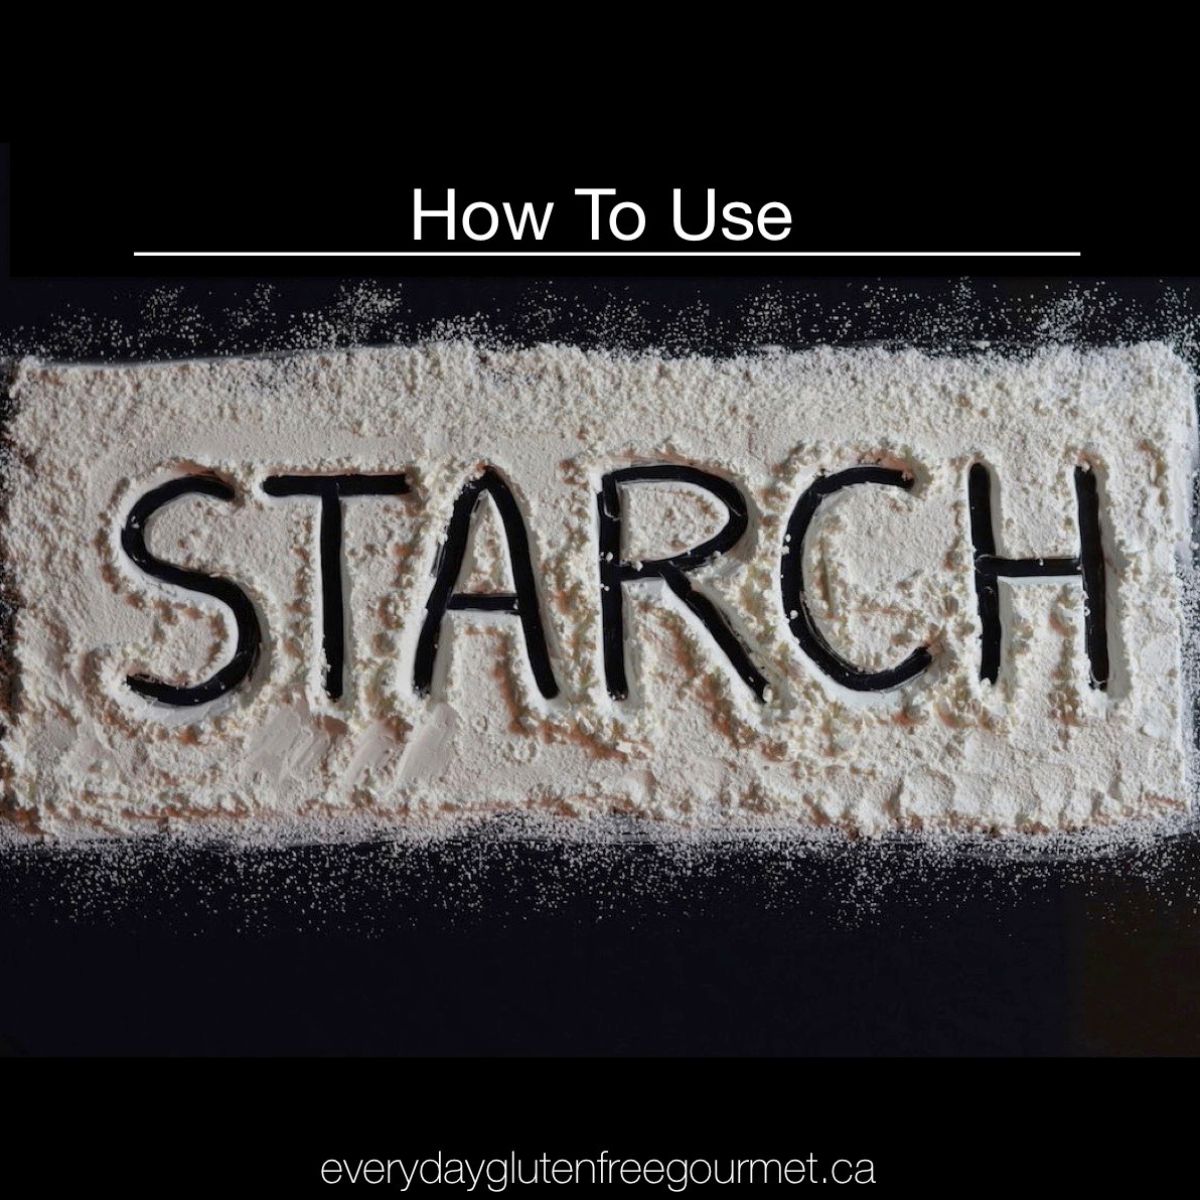 The word 'starch' drawn in a pile of tapioca starch.